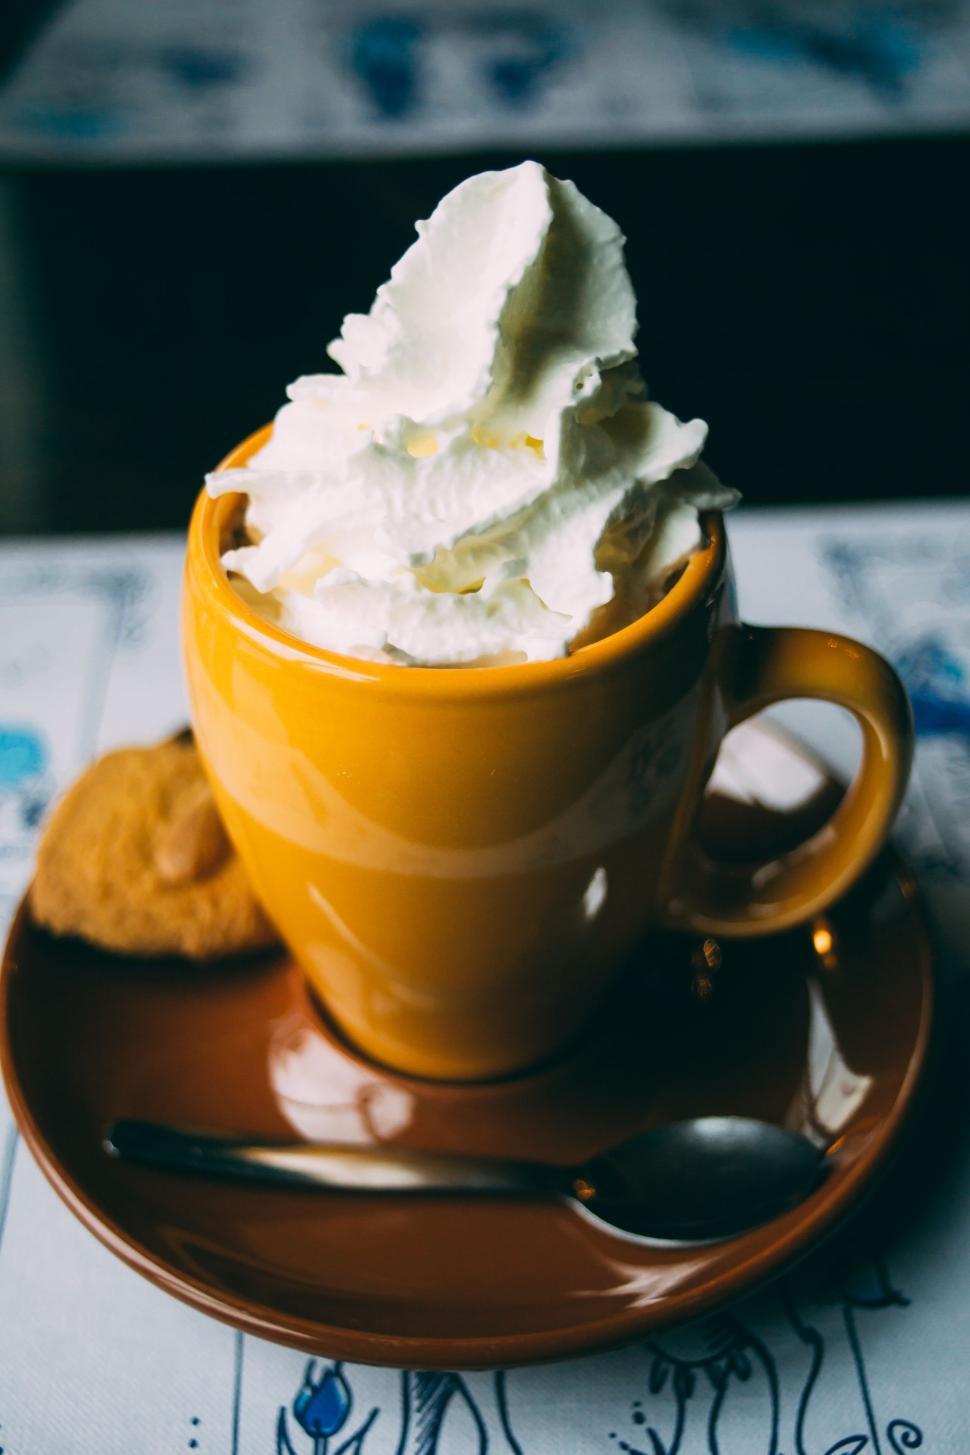 Free Image of Whipped Cream Cup on Saucer 